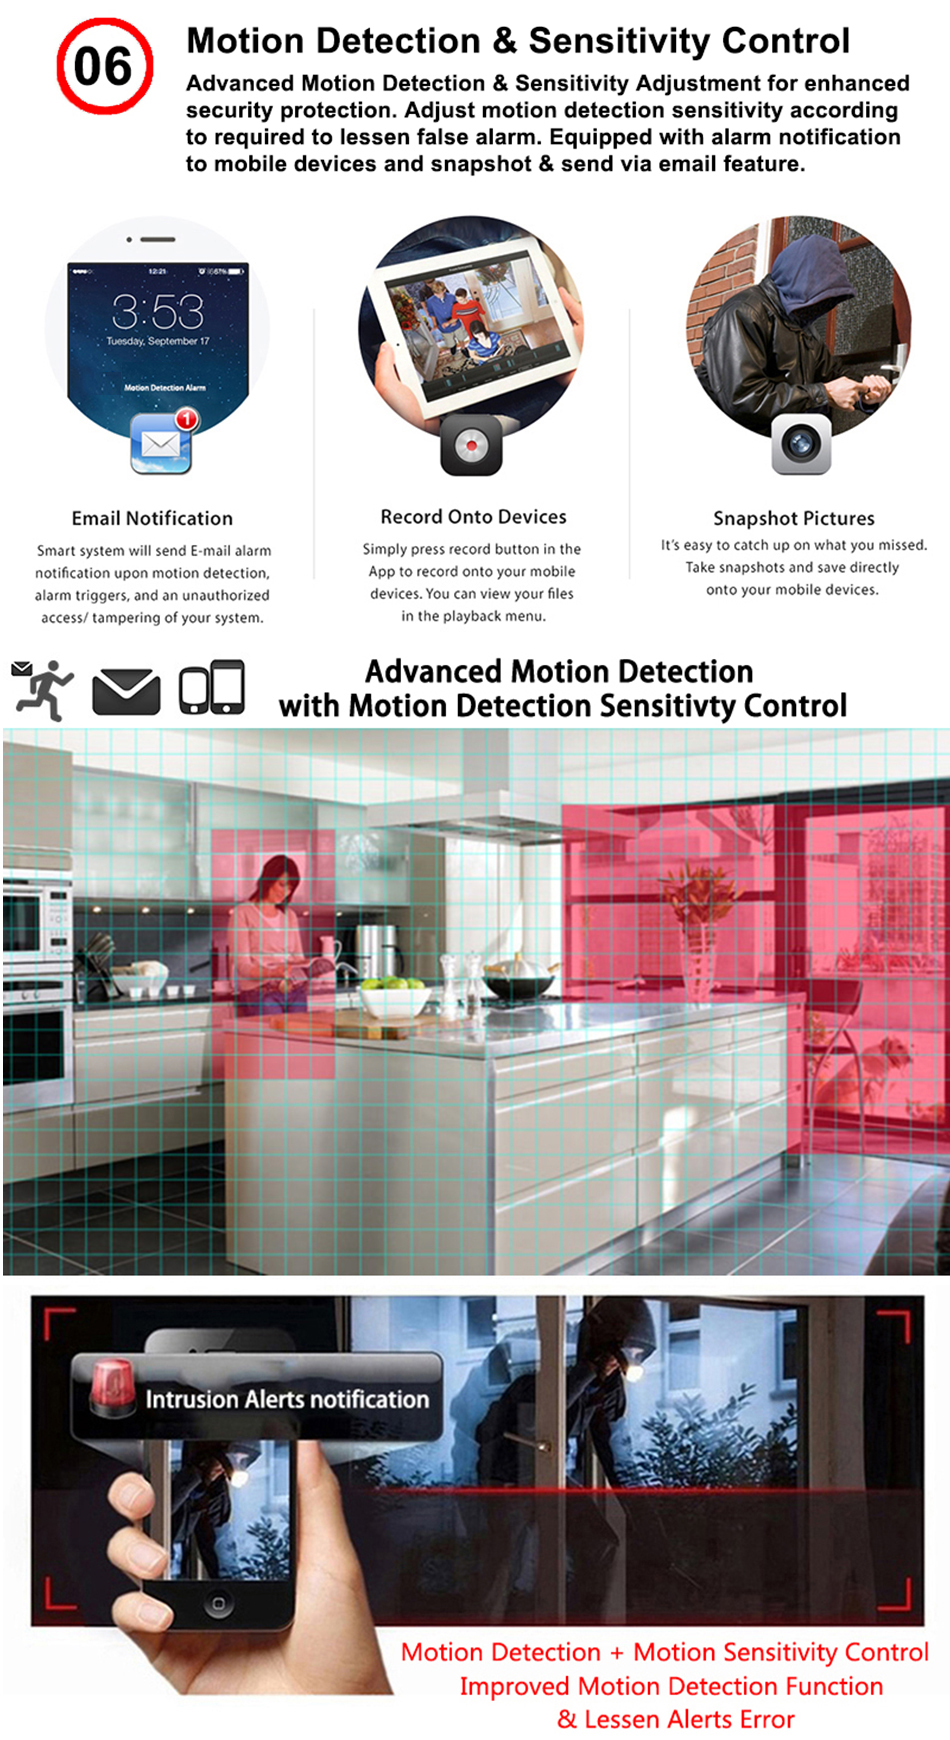 Motion detection & sensitivity control, advanced motion detection and sensitivity adjustment for enhanced security protection. Adjust motion detection sensitivity according to required to lessen false alarm. Equipped with alarm notification to mobile devices and snapshot and send via email feature. Smart system will send email alarm notification upon motion detection, alarm triggers and an unauthorized access/tempering of your system. Simply press record button in the app to record onto your mobile devices. You can view your files in the playback menu. It's easy to catch up on what you missed. Take snapshots and save directly on to your mobile devices.